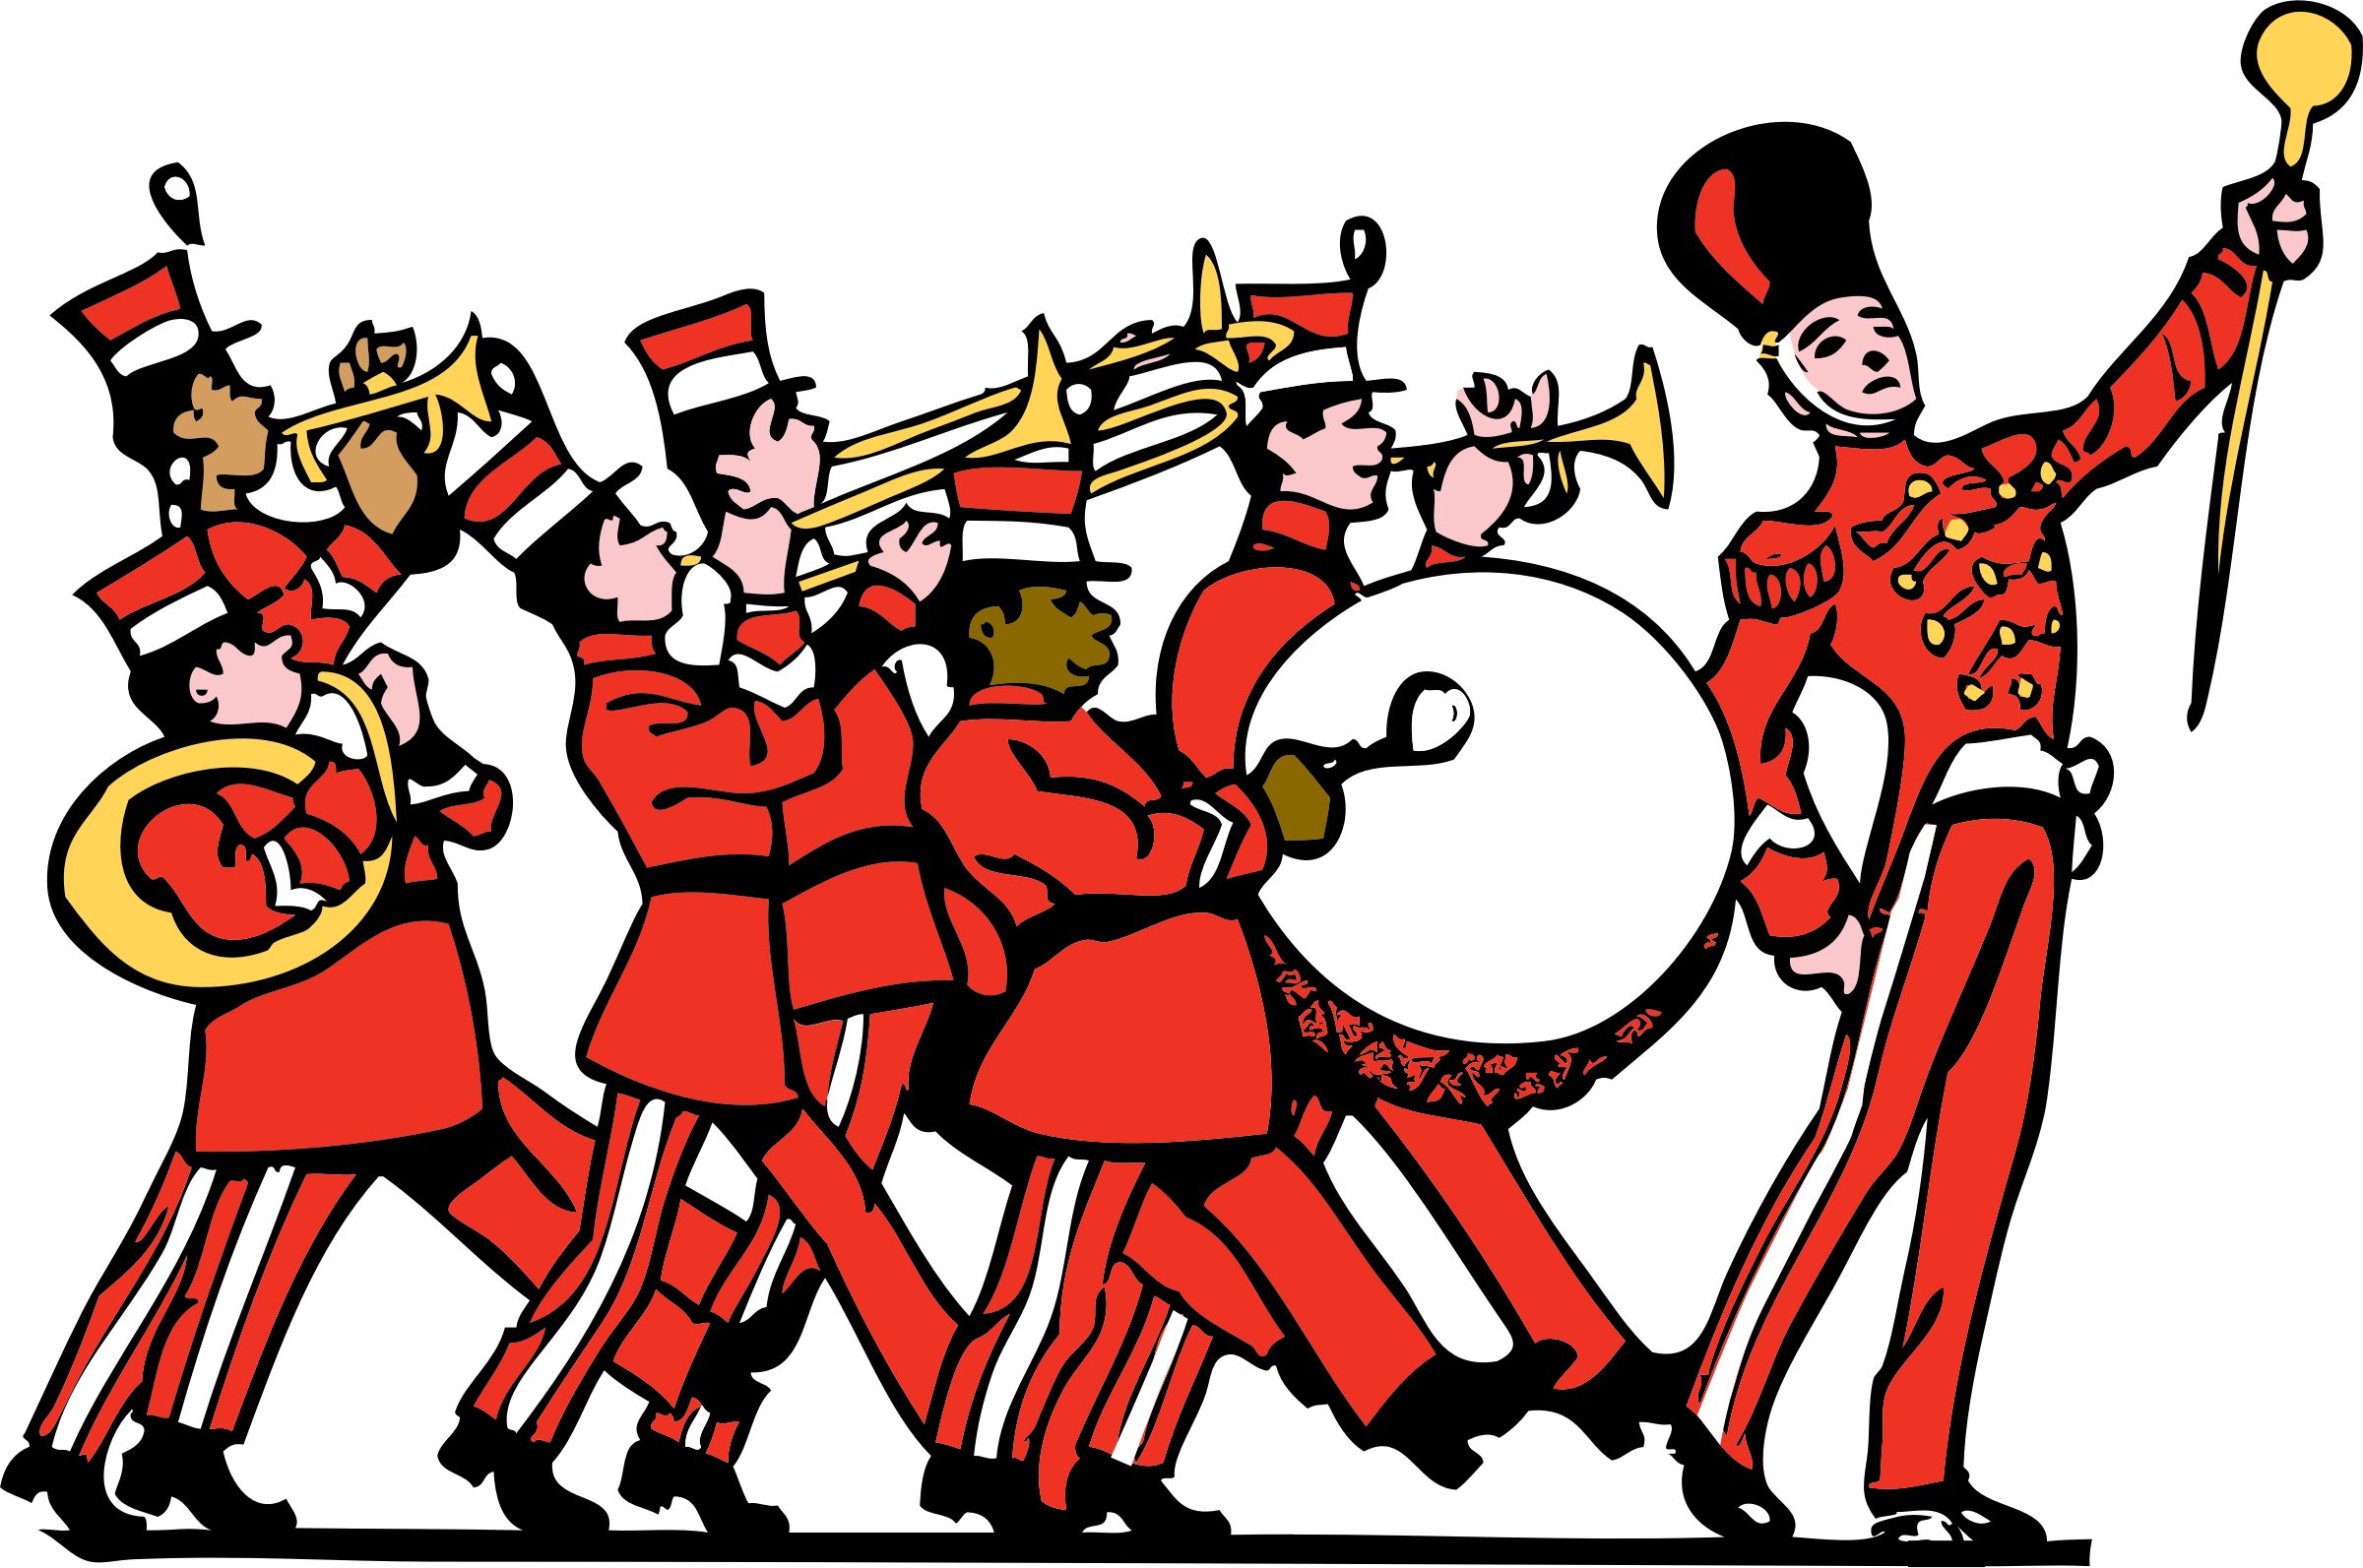 drum clipart marching band drum